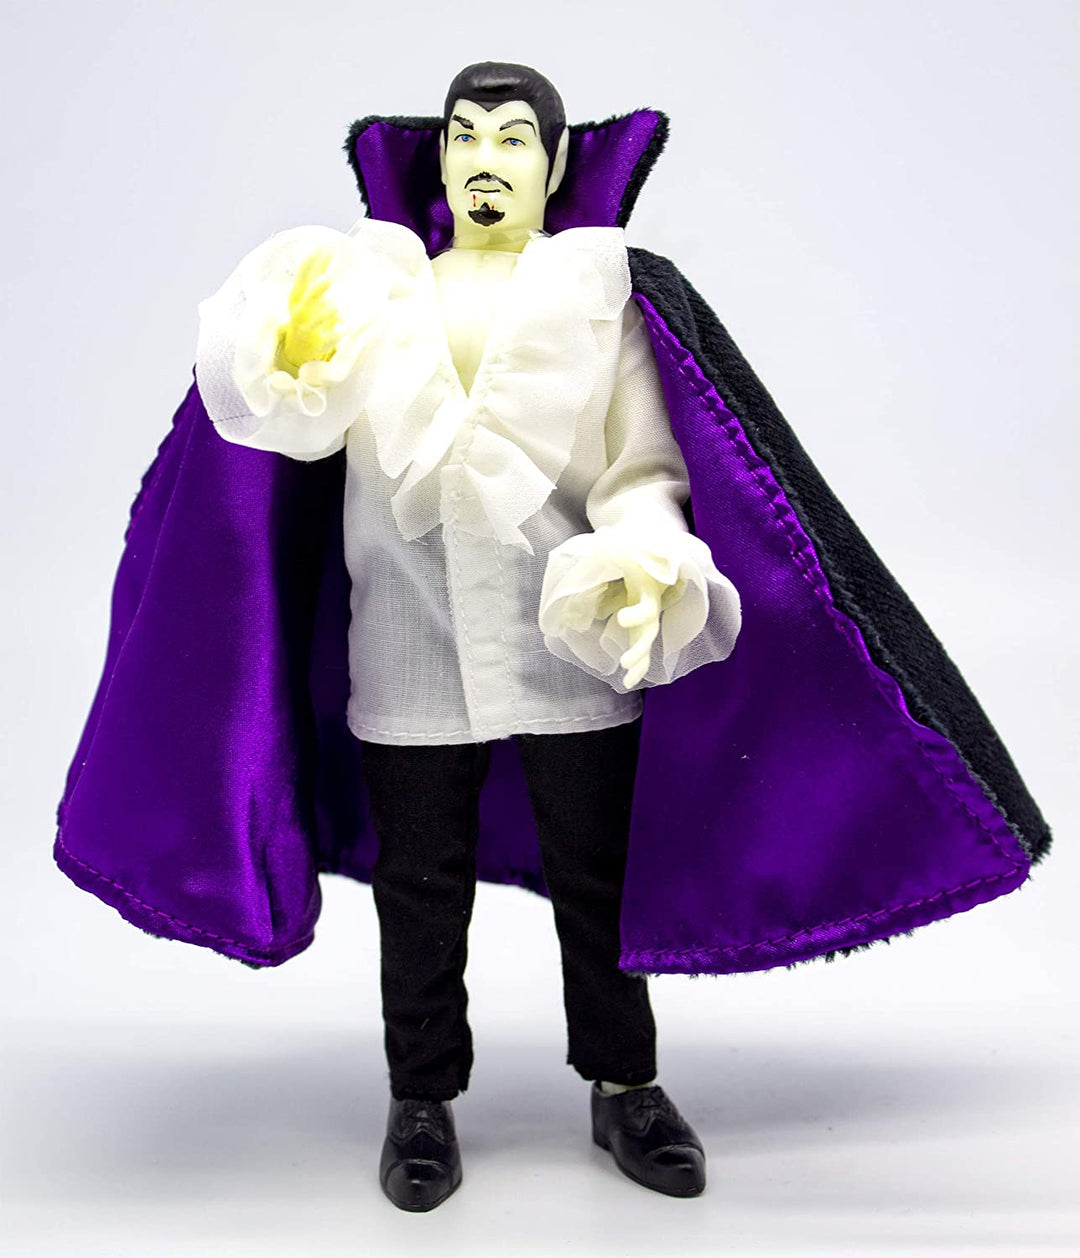 Dracula Glow in the Dark 8" Mego Action Figure